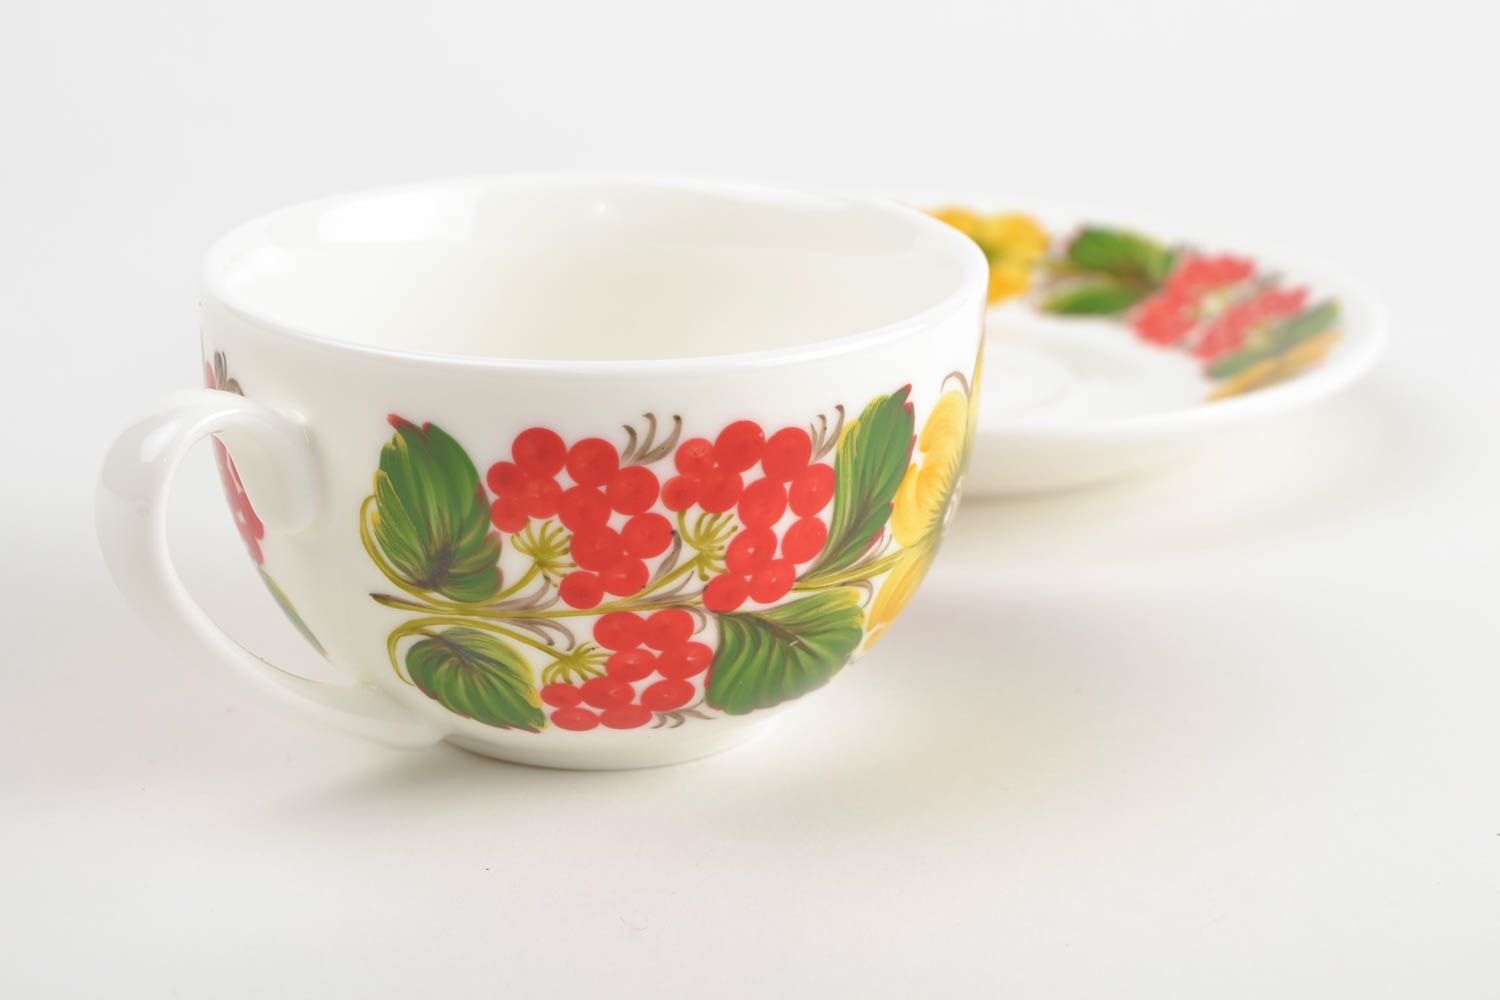 Wide Russian style teacup with floral design, handle, saucer photo 3